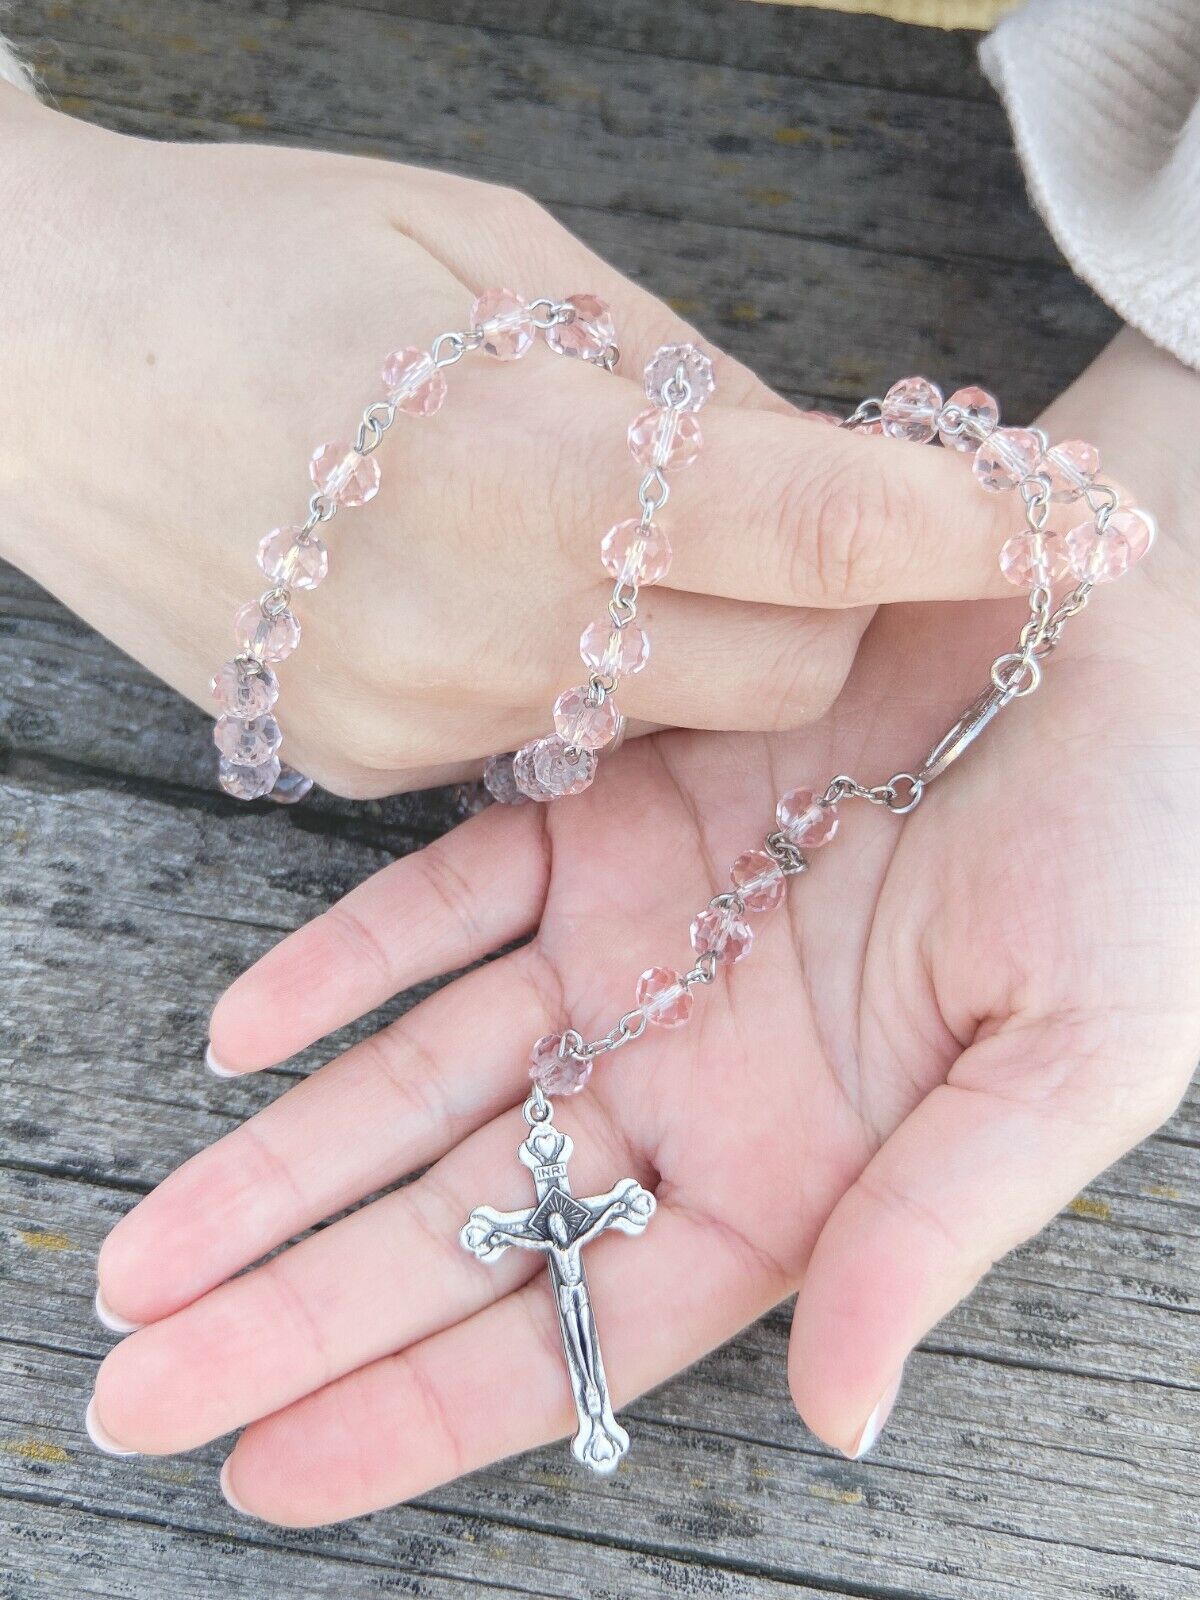 Pink Crystals Beads Rosary Necklace Miraculous Medal & Cross Crucifix 20" Nazareth Store